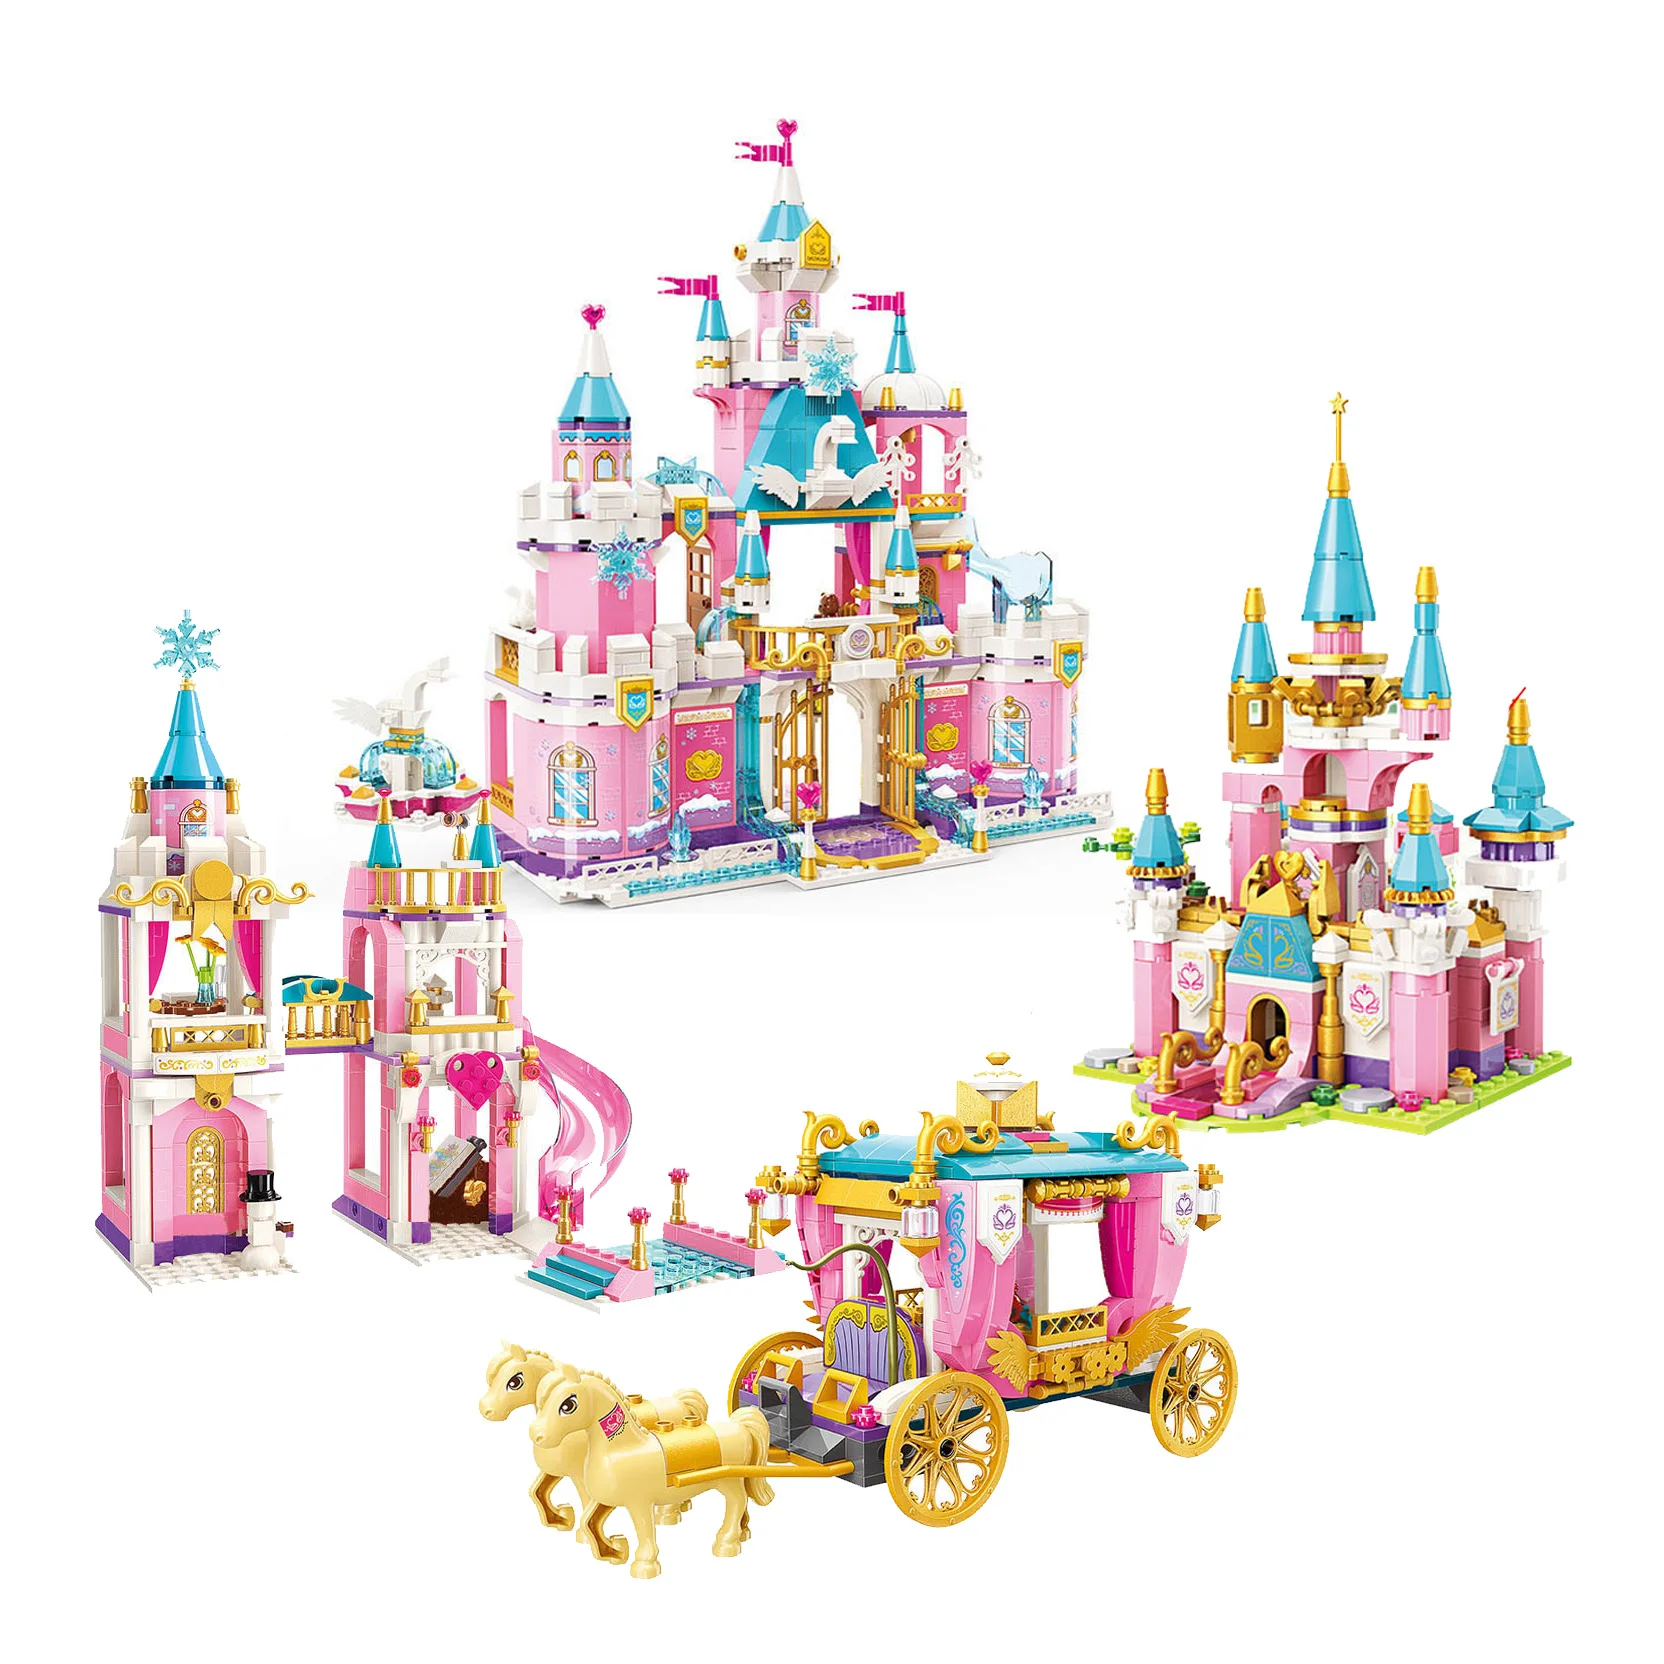 

Girls Building Block Princess Leah Snowy Swan Castle Royal Parade Carriage Educational Bricks Toy For Girl Gift